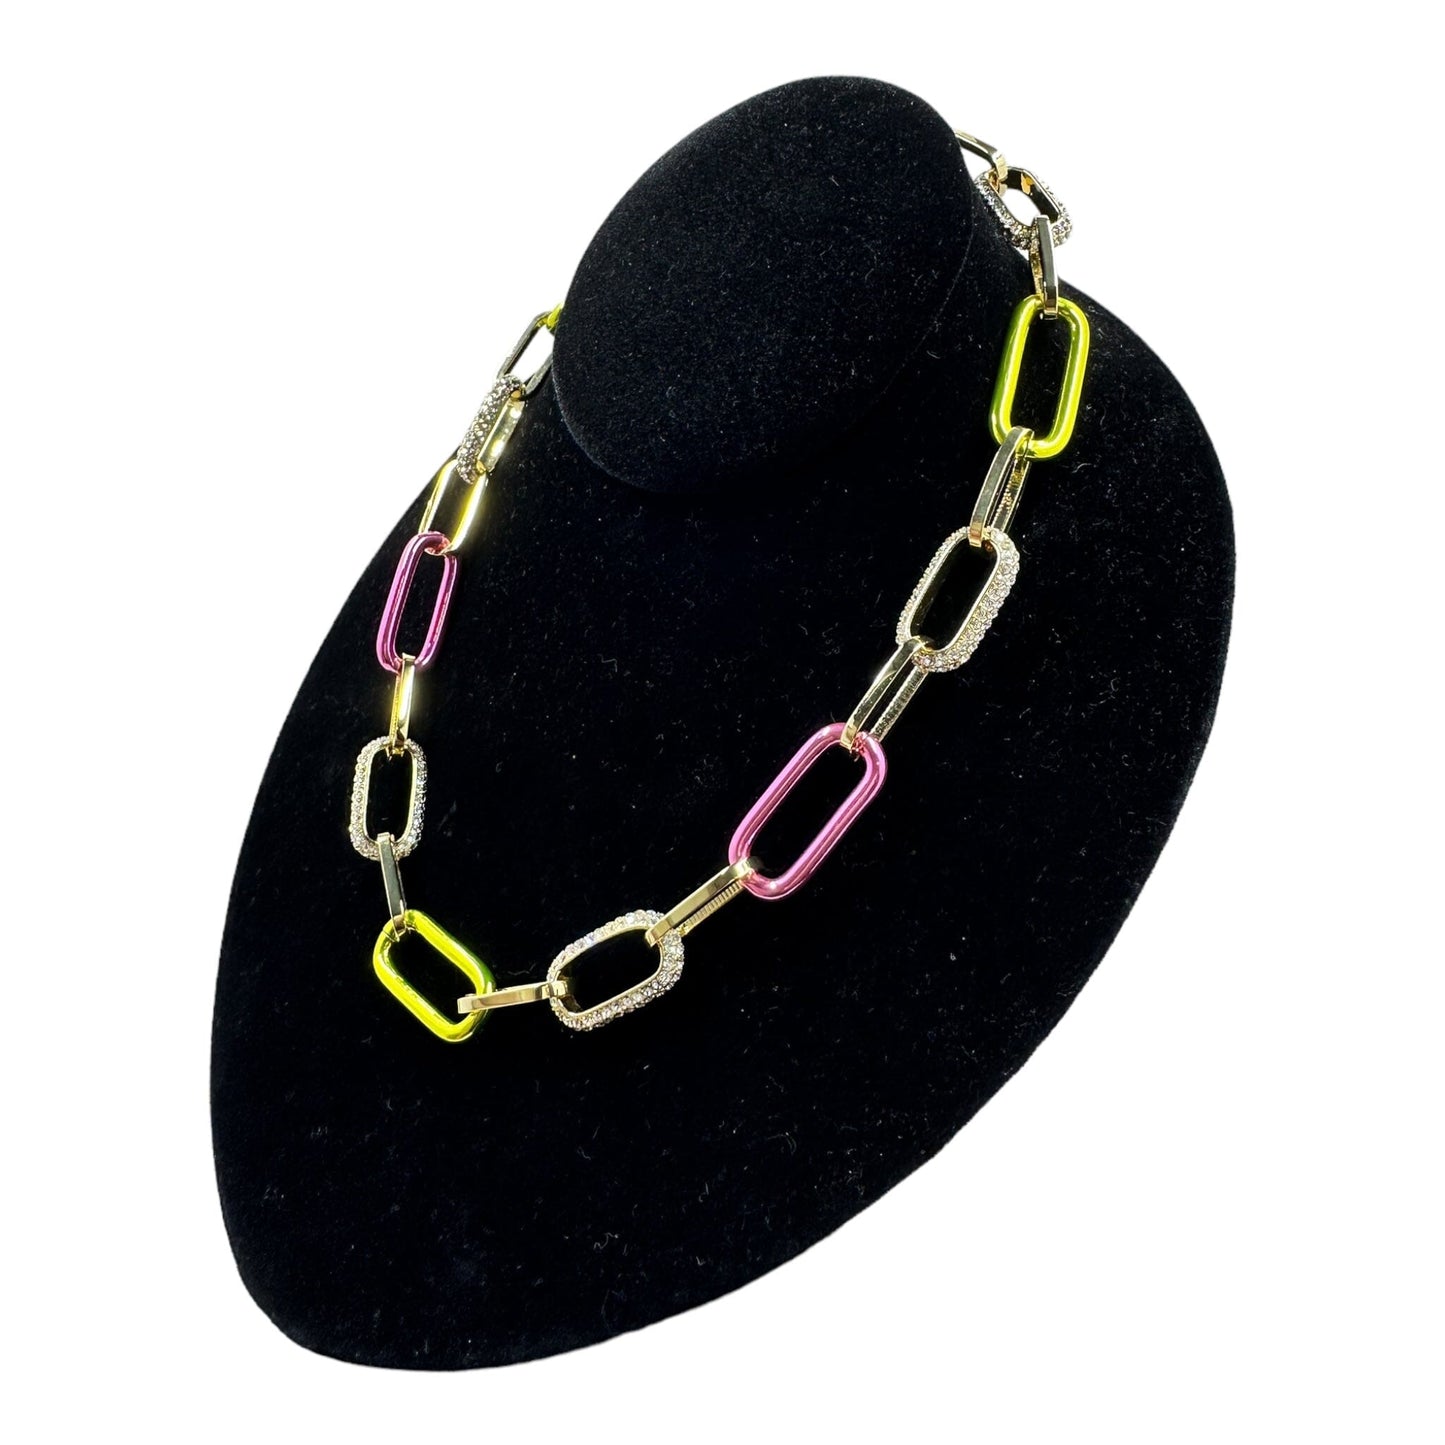 Delic Pink & Green Link Pave Chain Necklace Necklaces Trendzio 